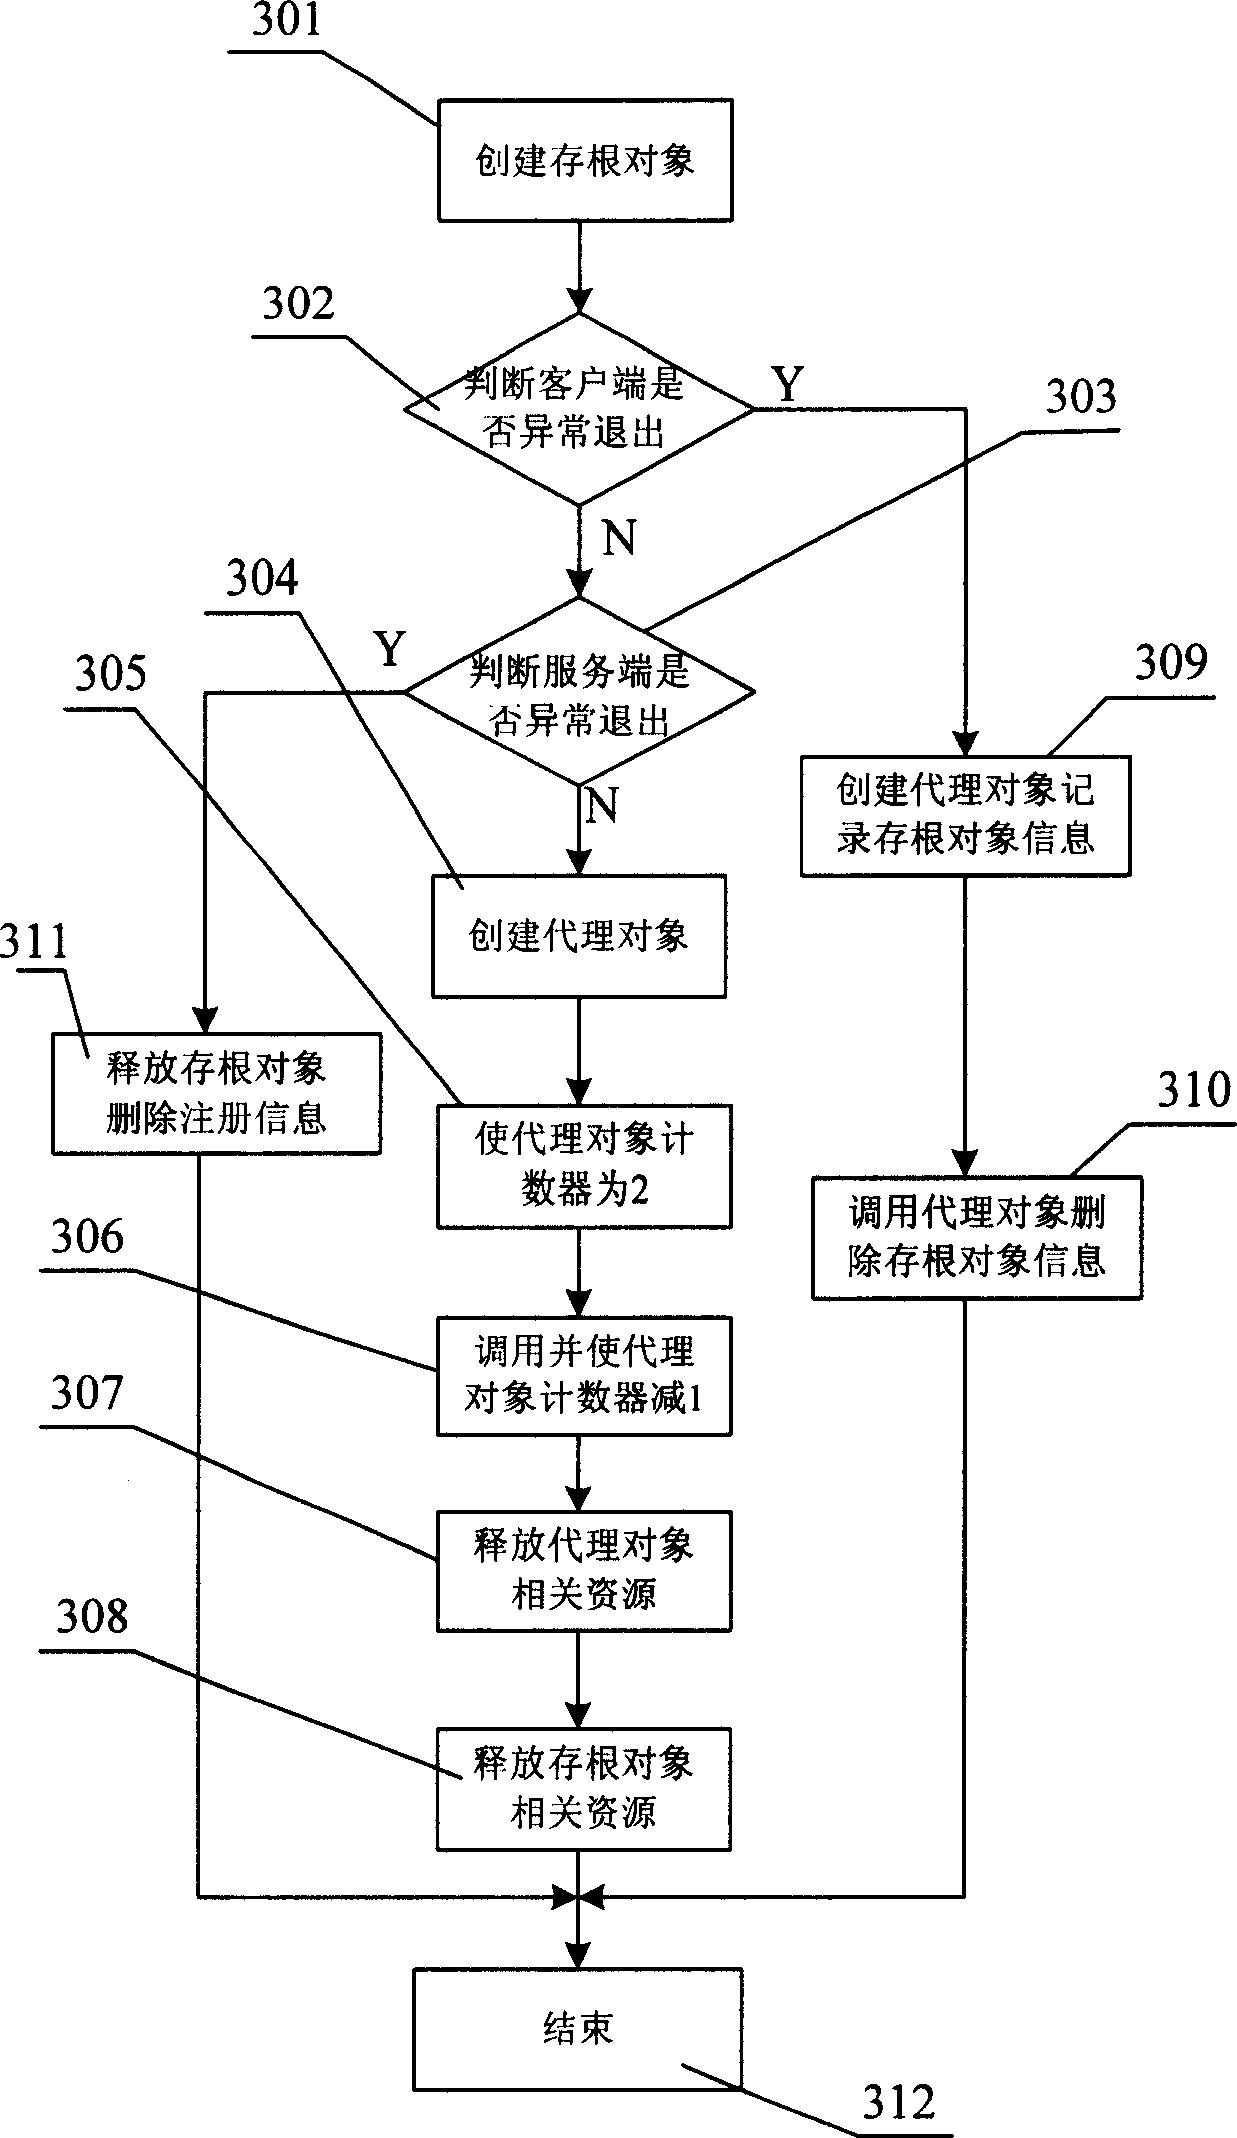 Method for managing long-distance structural components service cycle with class as unit